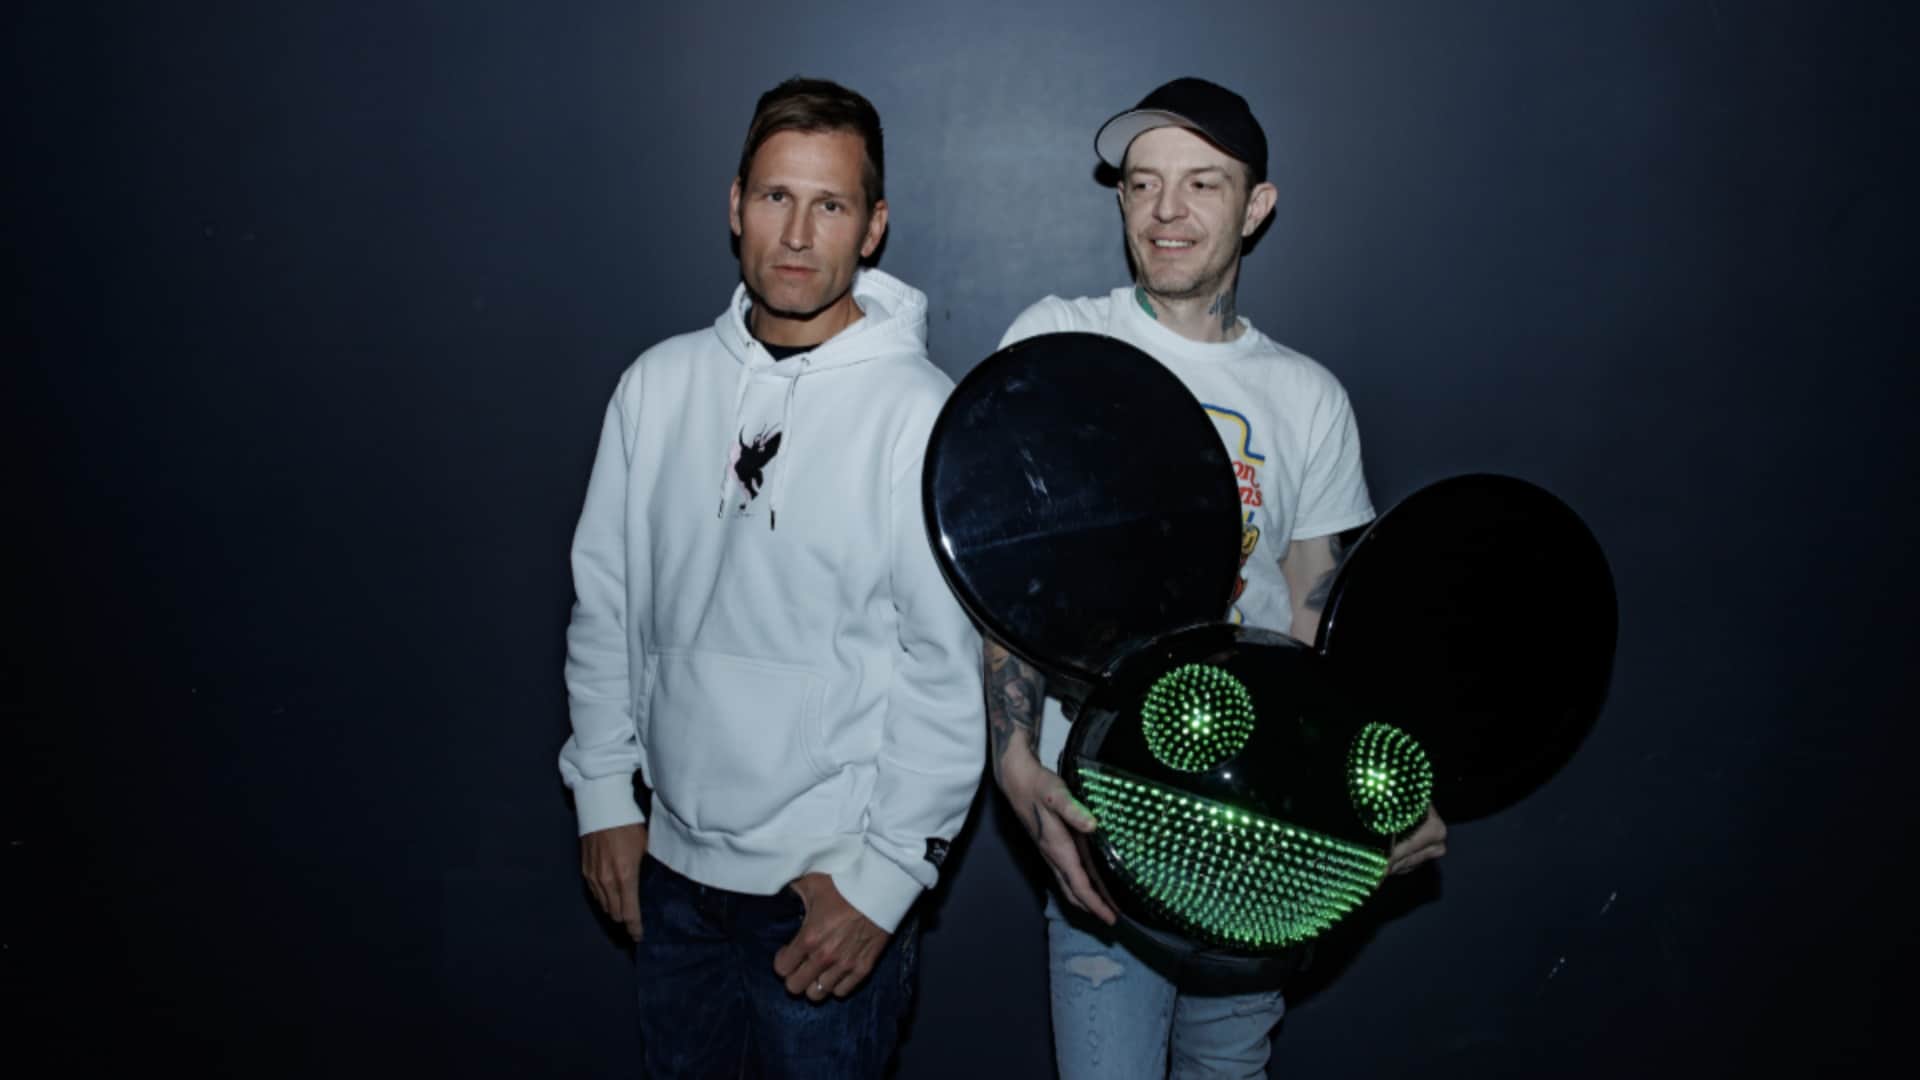 Kaskade & deadmau5 drop new Kx5 single ‘Alive’ featuring The Moth and The Flame